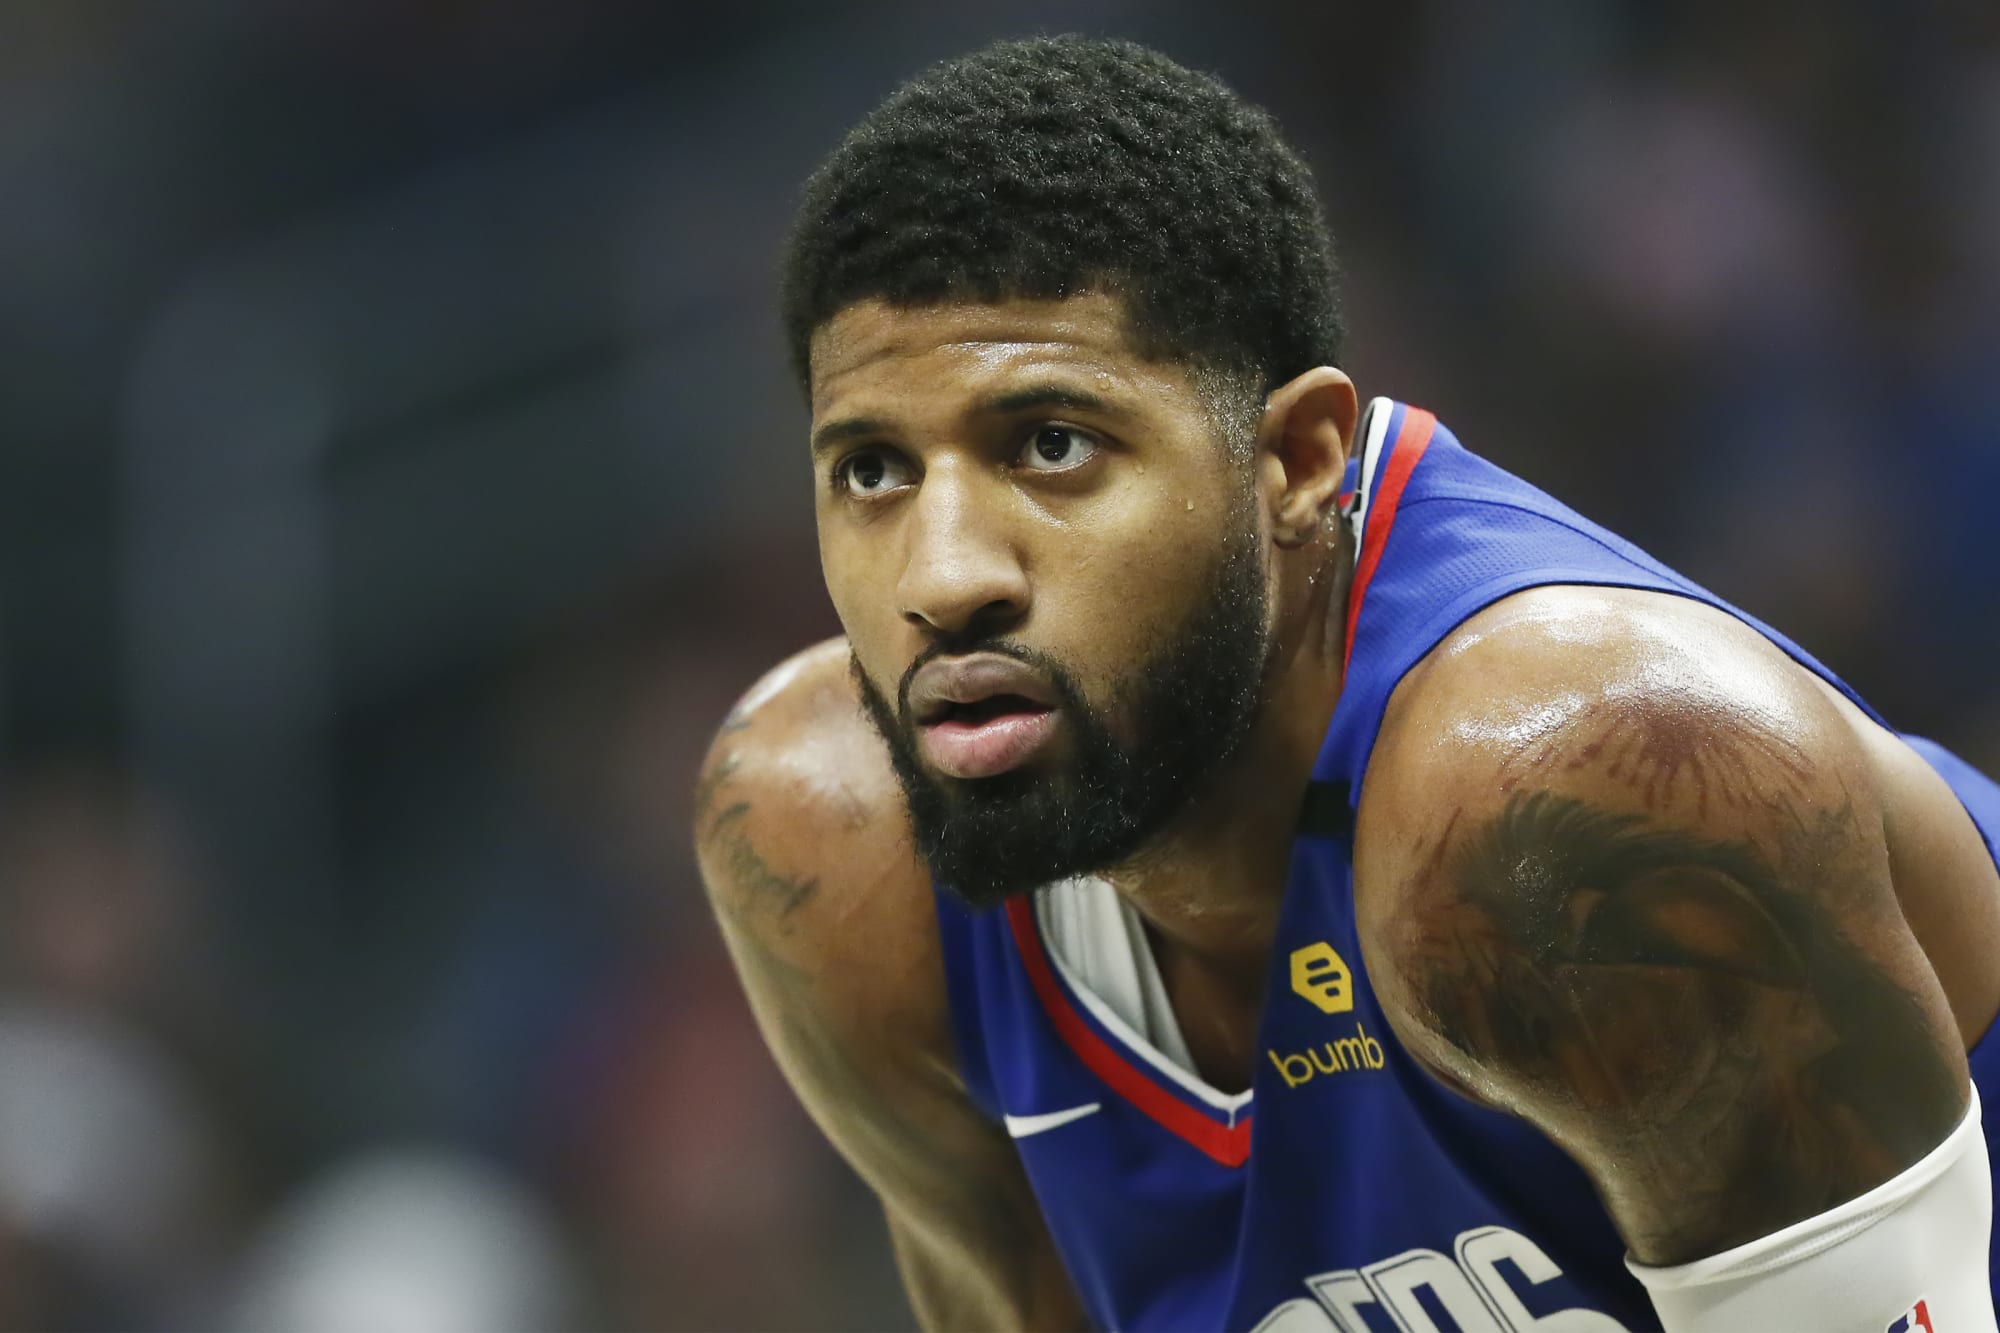 Paul George tells media he wants to retire with the LA Clippers